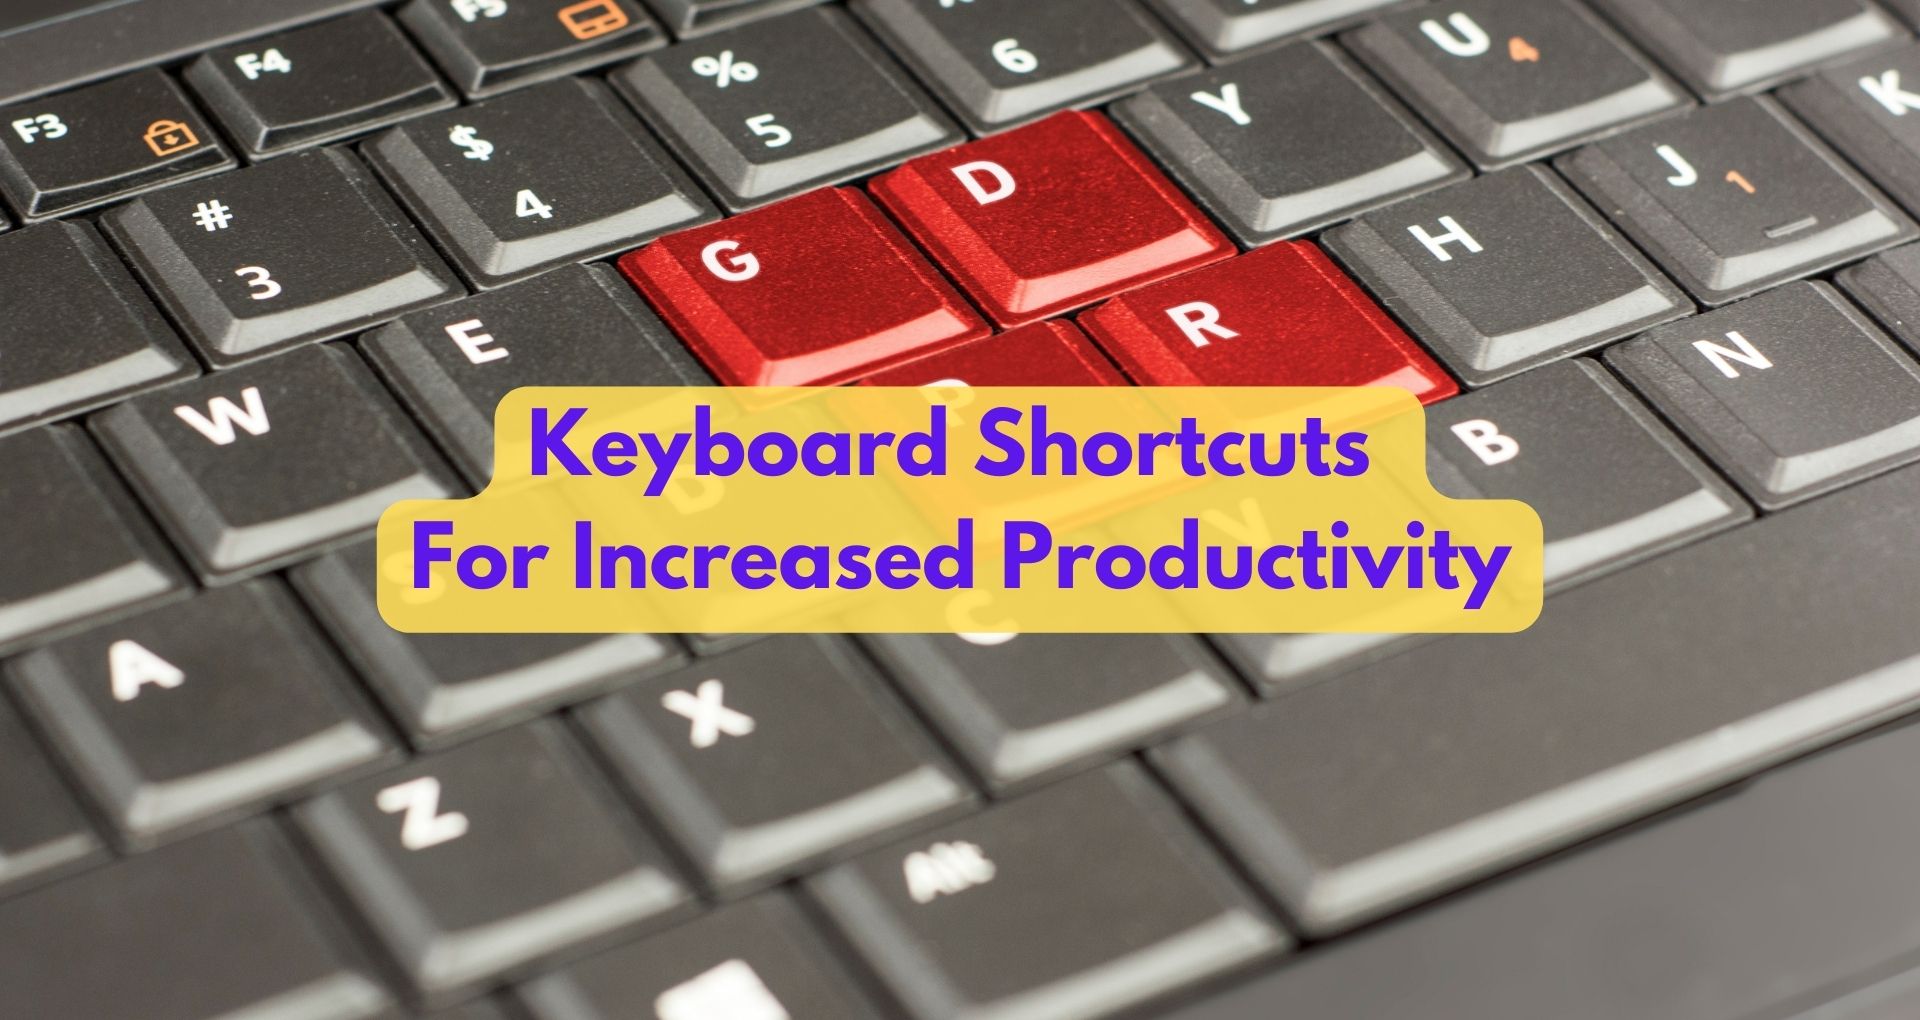 How To Use Keyboard Shortcuts For Increased Productivity?